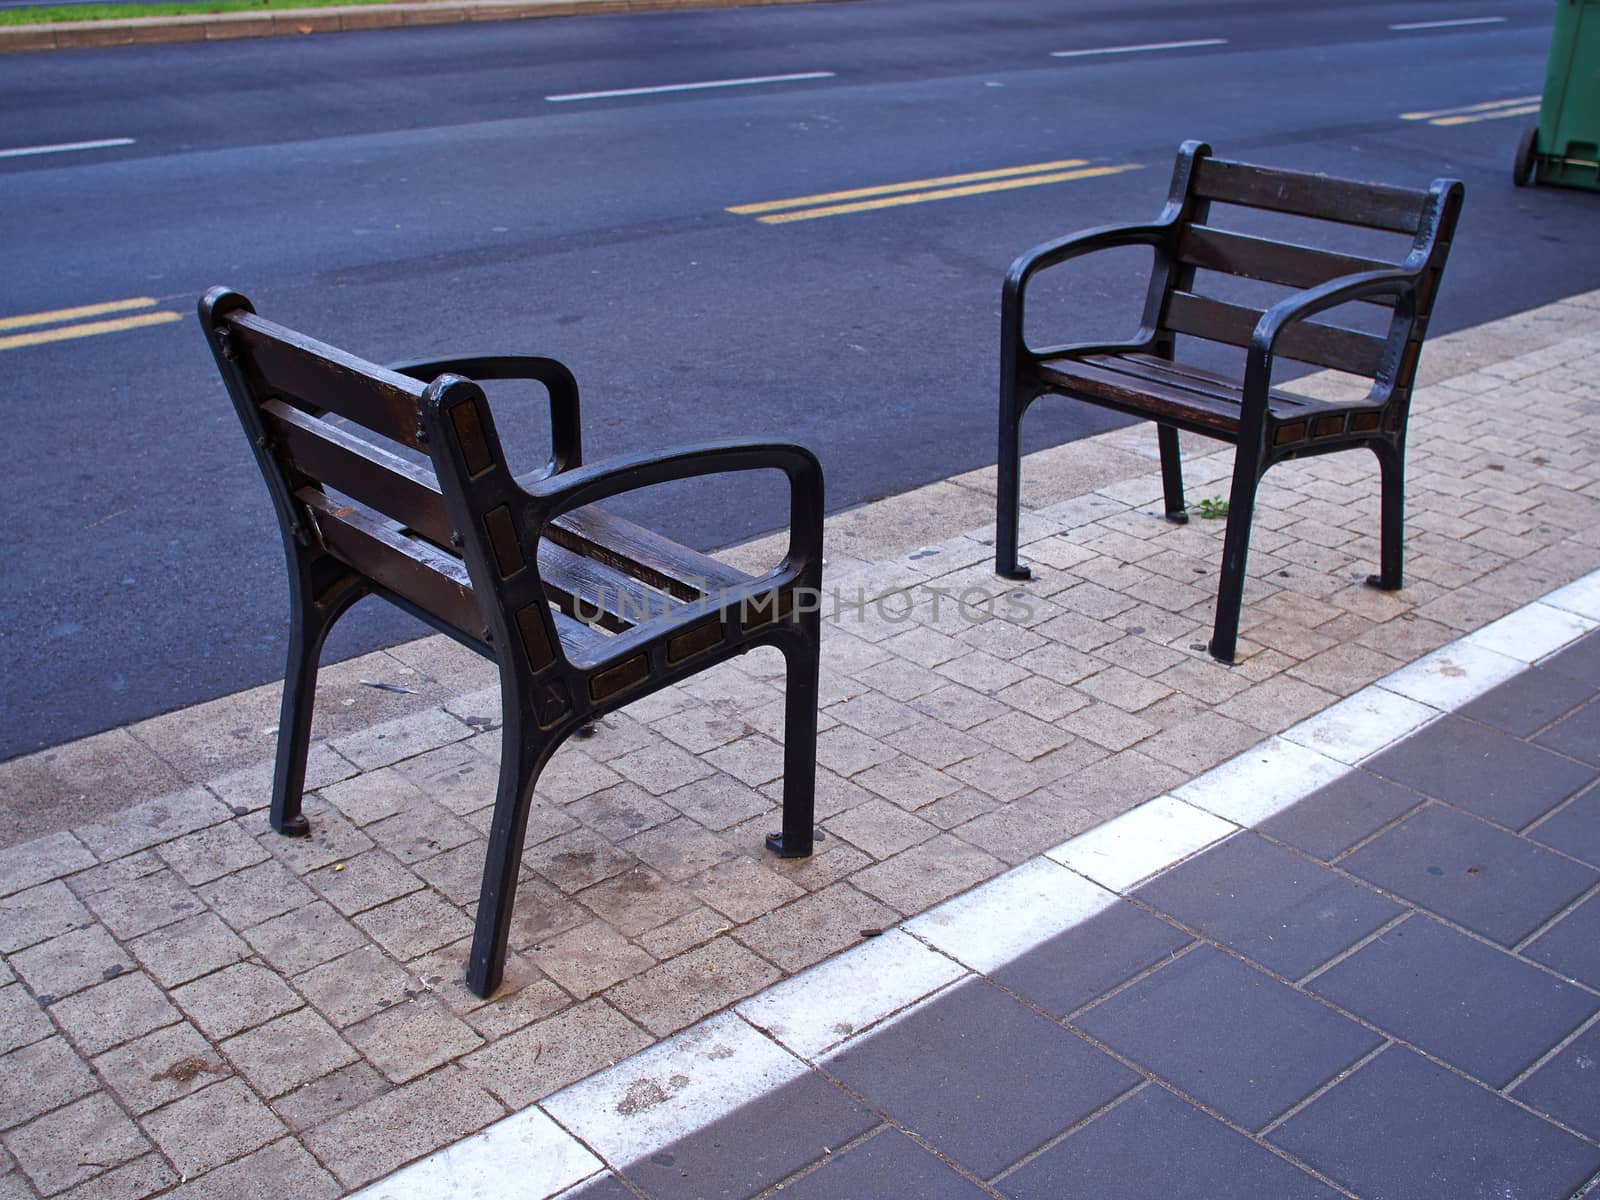 Street furniture chairs by Ronyzmbow